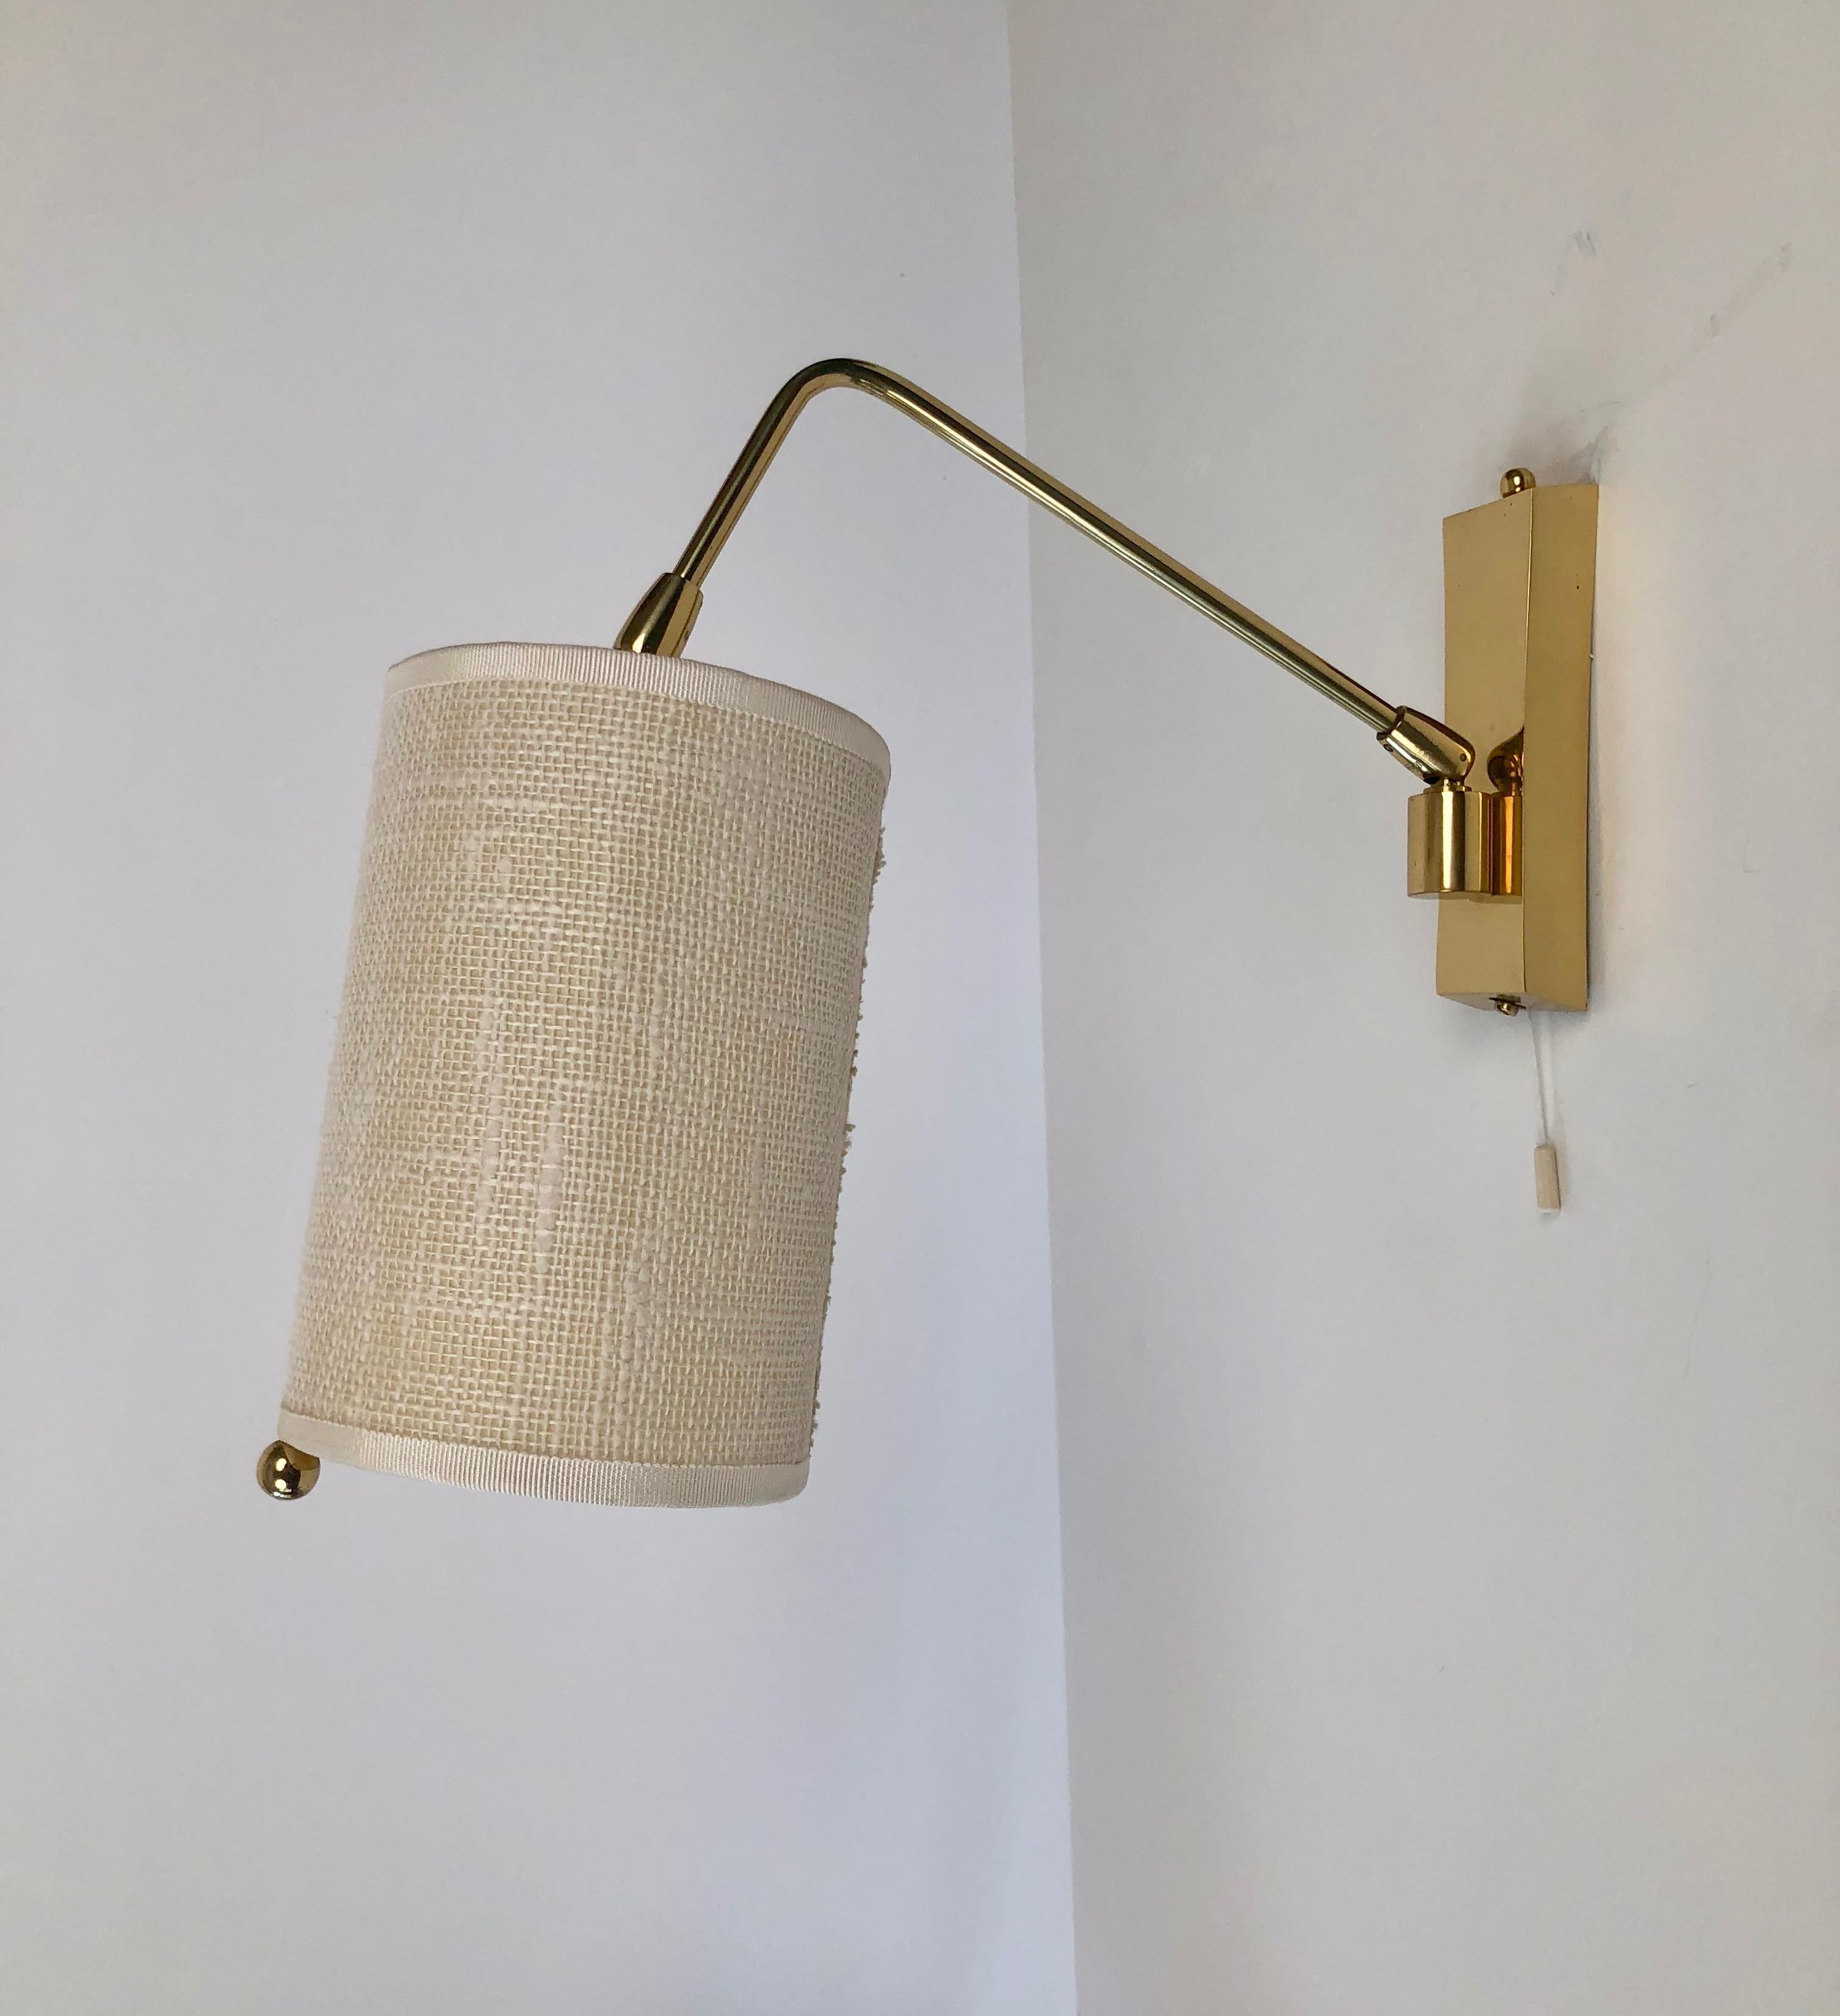 Minimalistic  wall light in brass, adjustable from two swivel joints: on the base and on the 
end of the arm, by the bulb. The shade is original in a light cream coloured linen.
The lamp is very precisely made, manufactured by J. T. Kalmar,